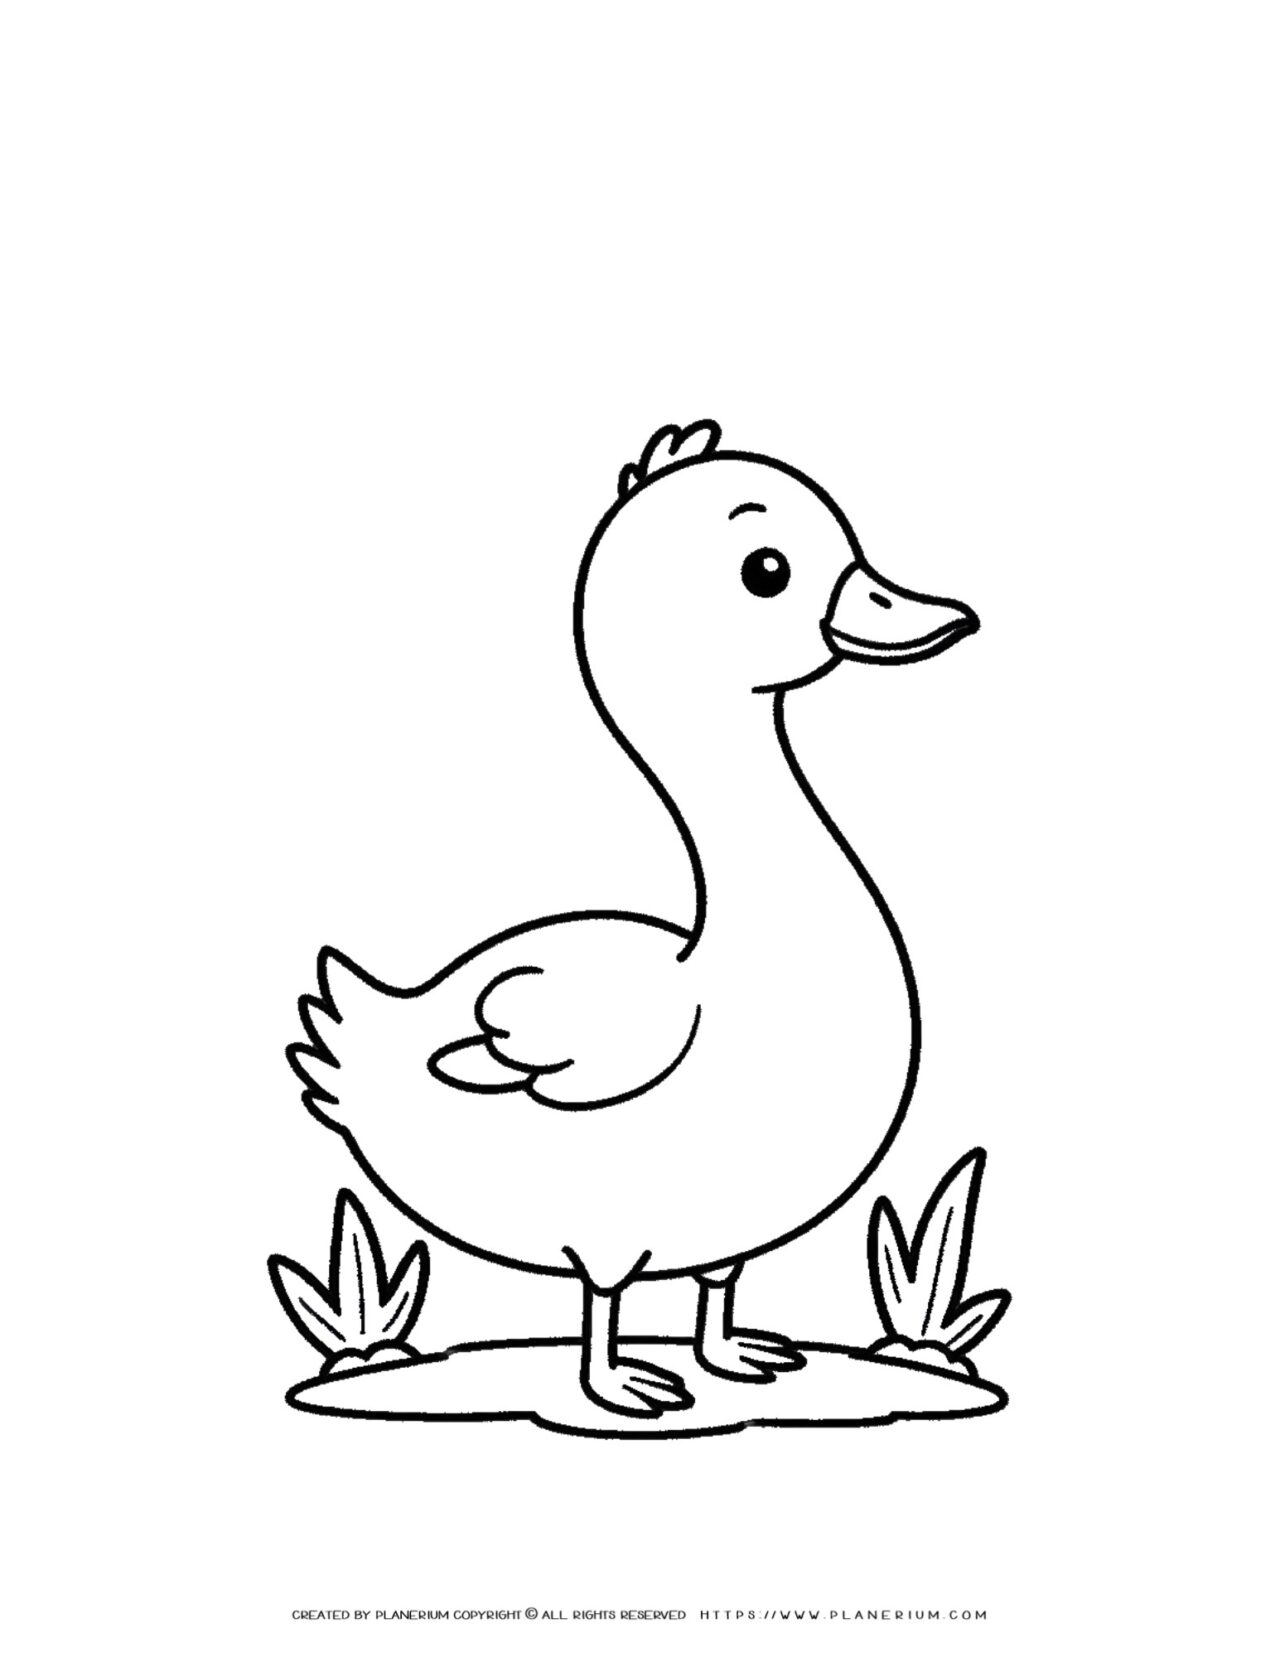 baby-goose-side-view-coloring-page-for-kids